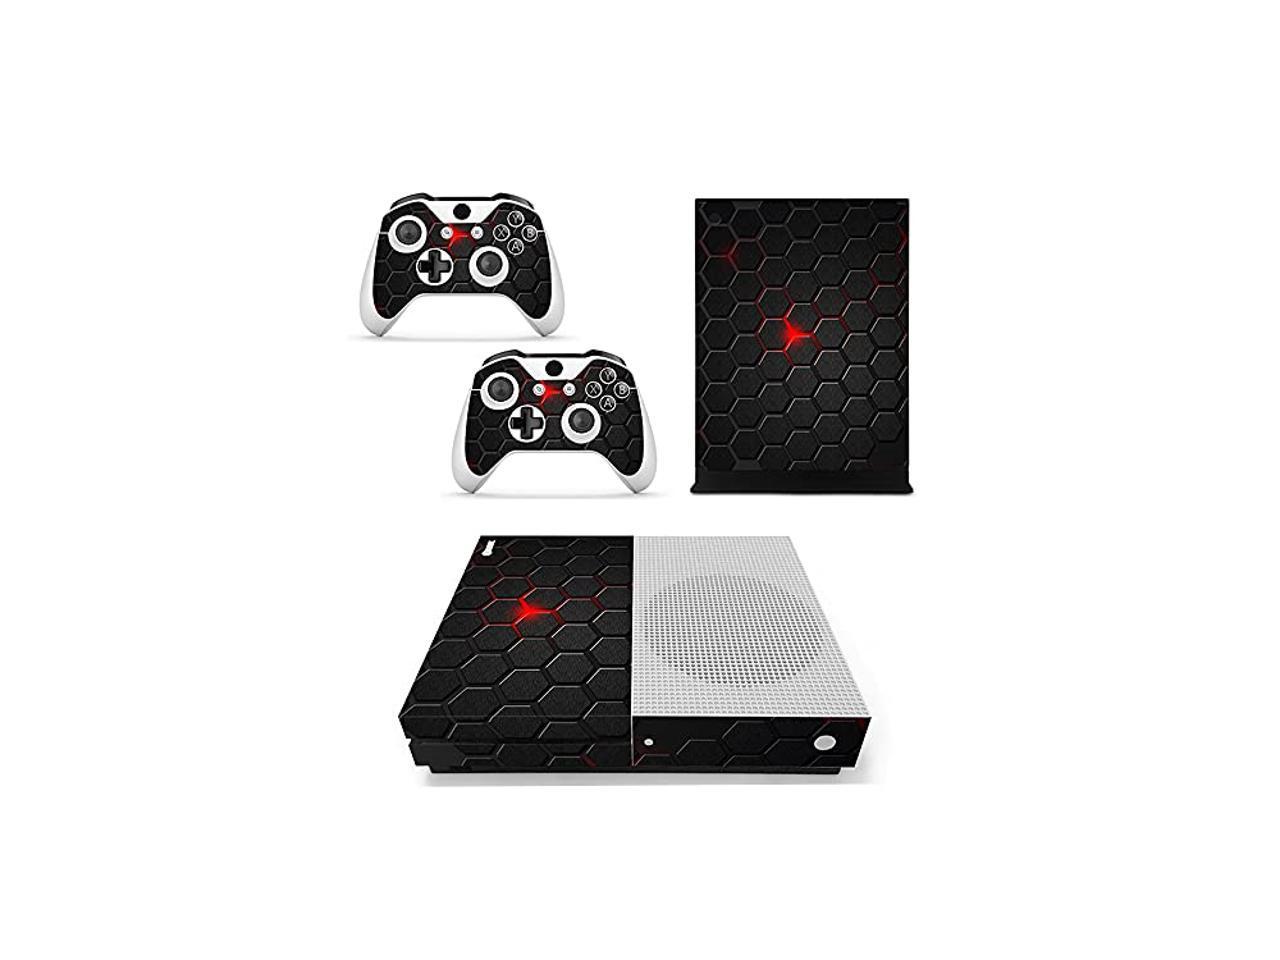 Nebular FOTTCZ Xbox One Skin Whole Body Vinyl Sticker Decal Cover for Microsoft Xbox One Console and Two Controller 